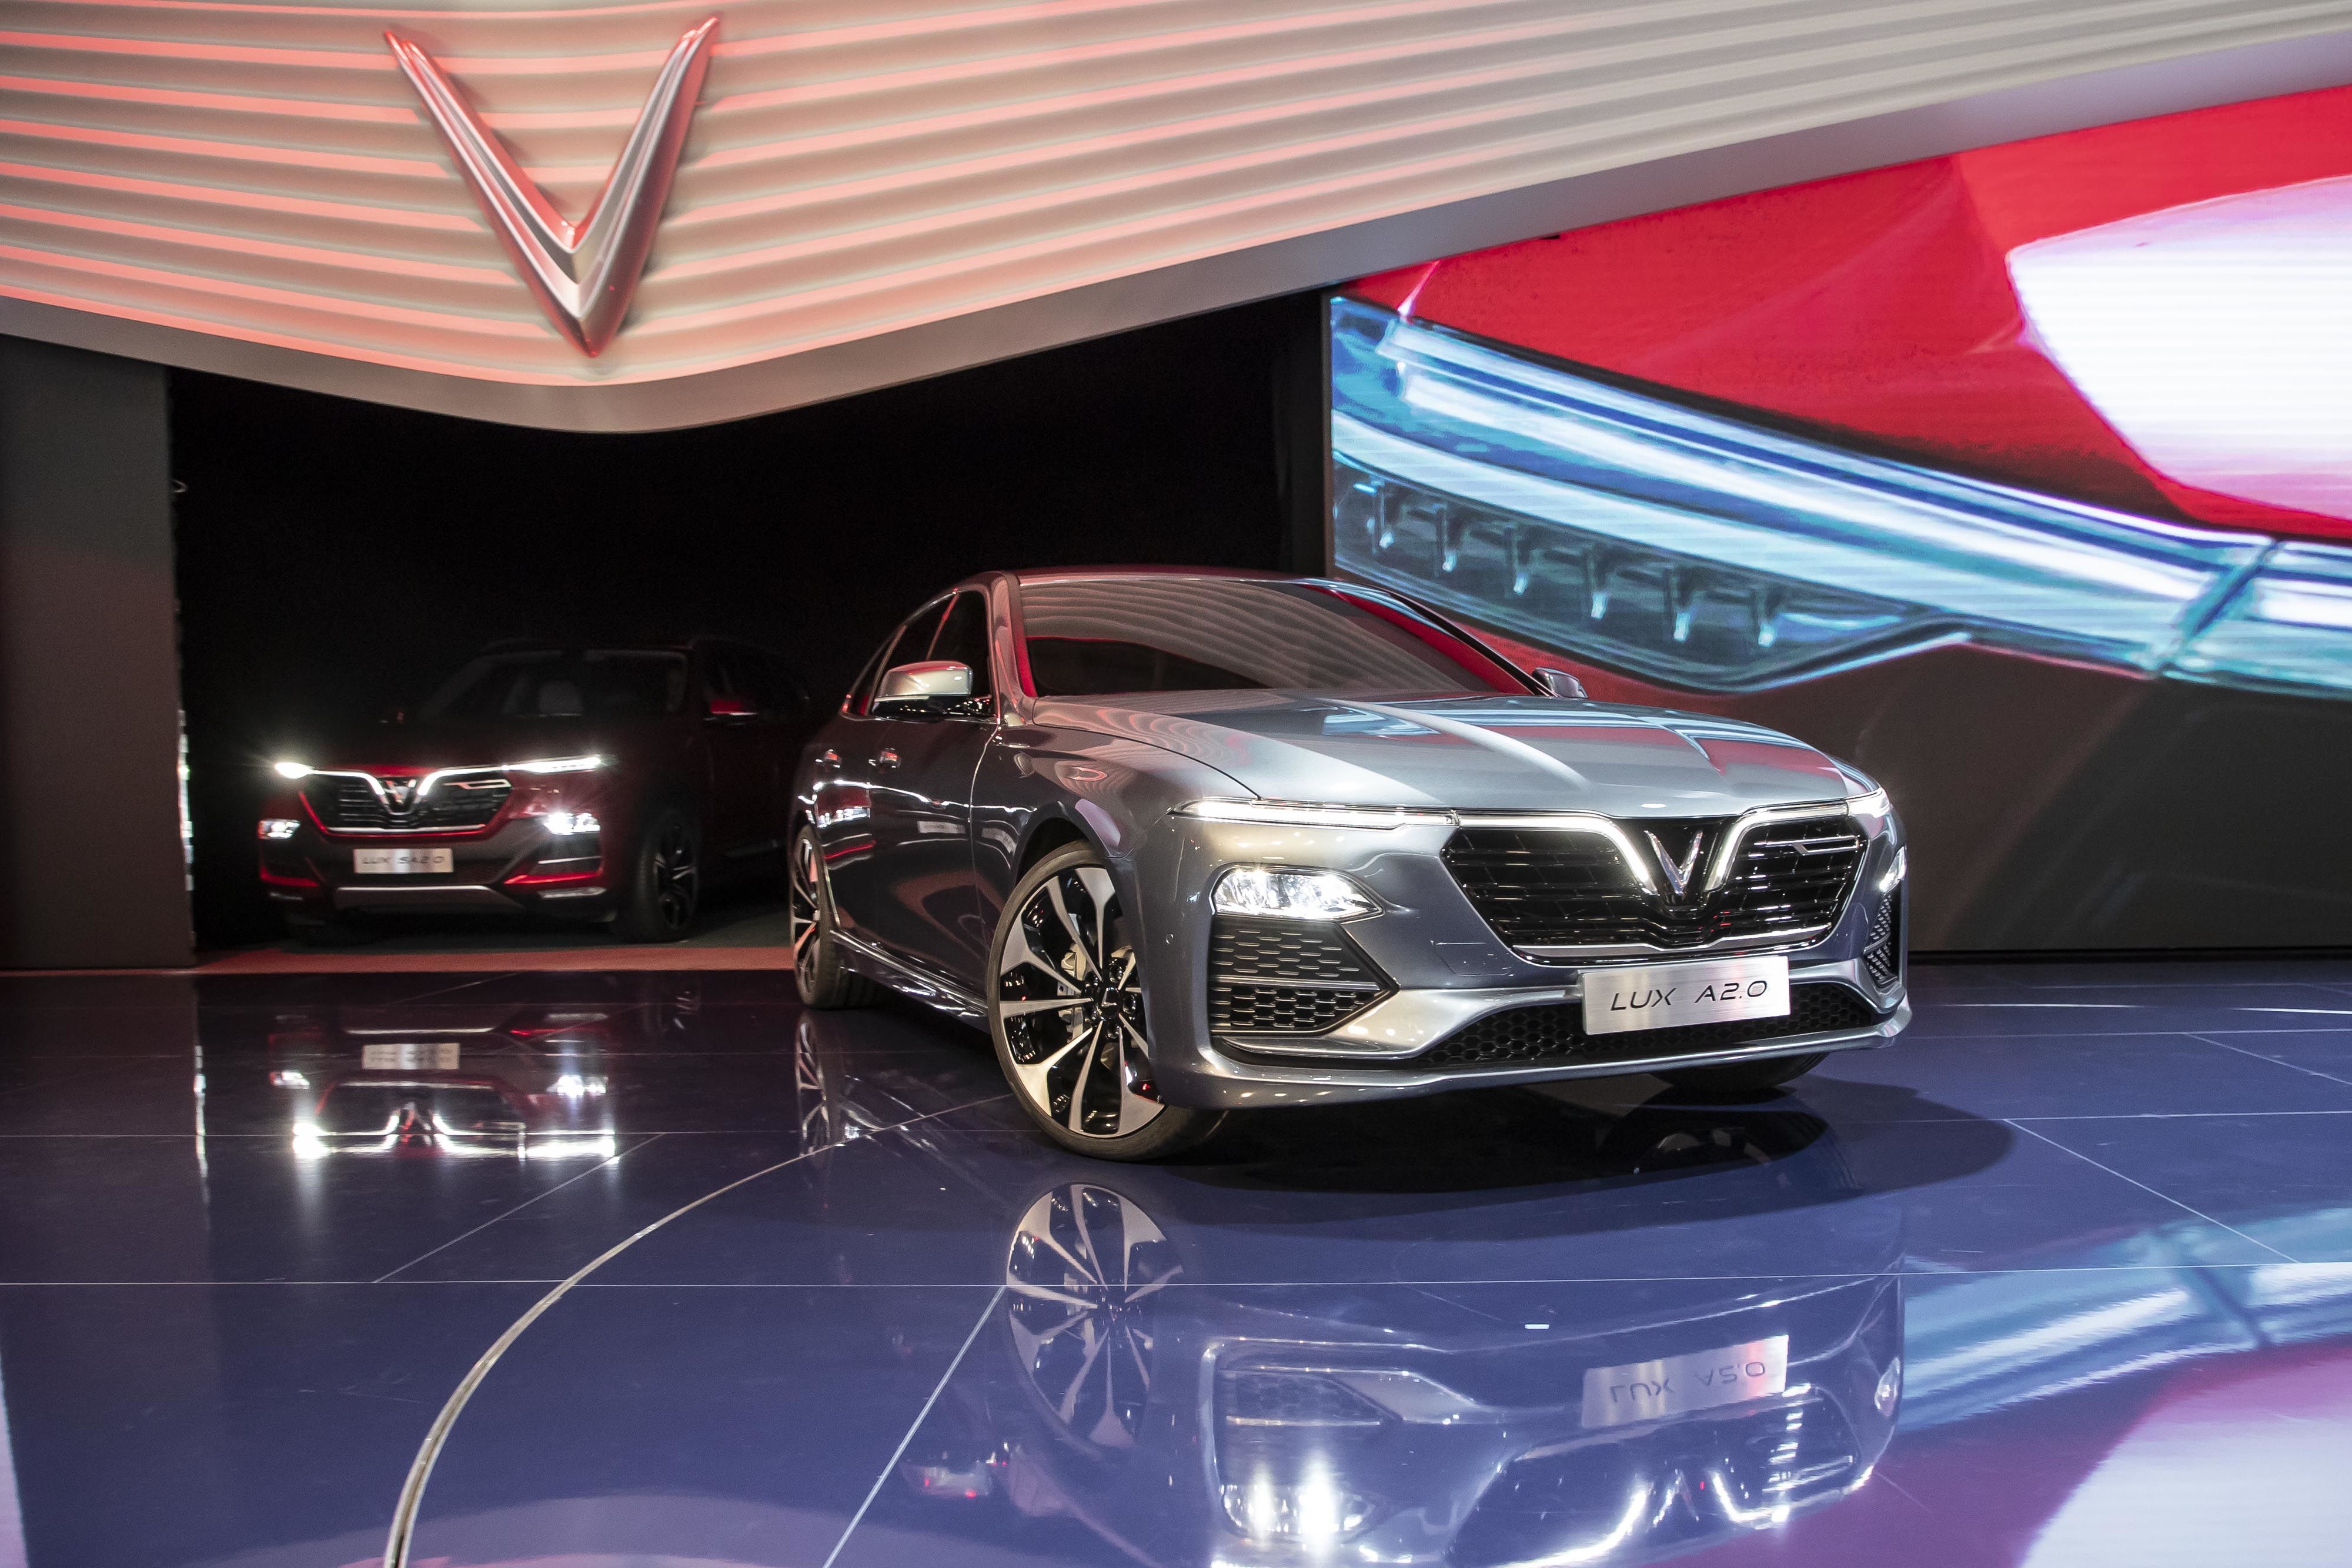 VinFast showcases its LUX A2.0 sedan at the Paris Motor Show in 2018. (Photo courtesy: Twitter/@VinFastofficial)